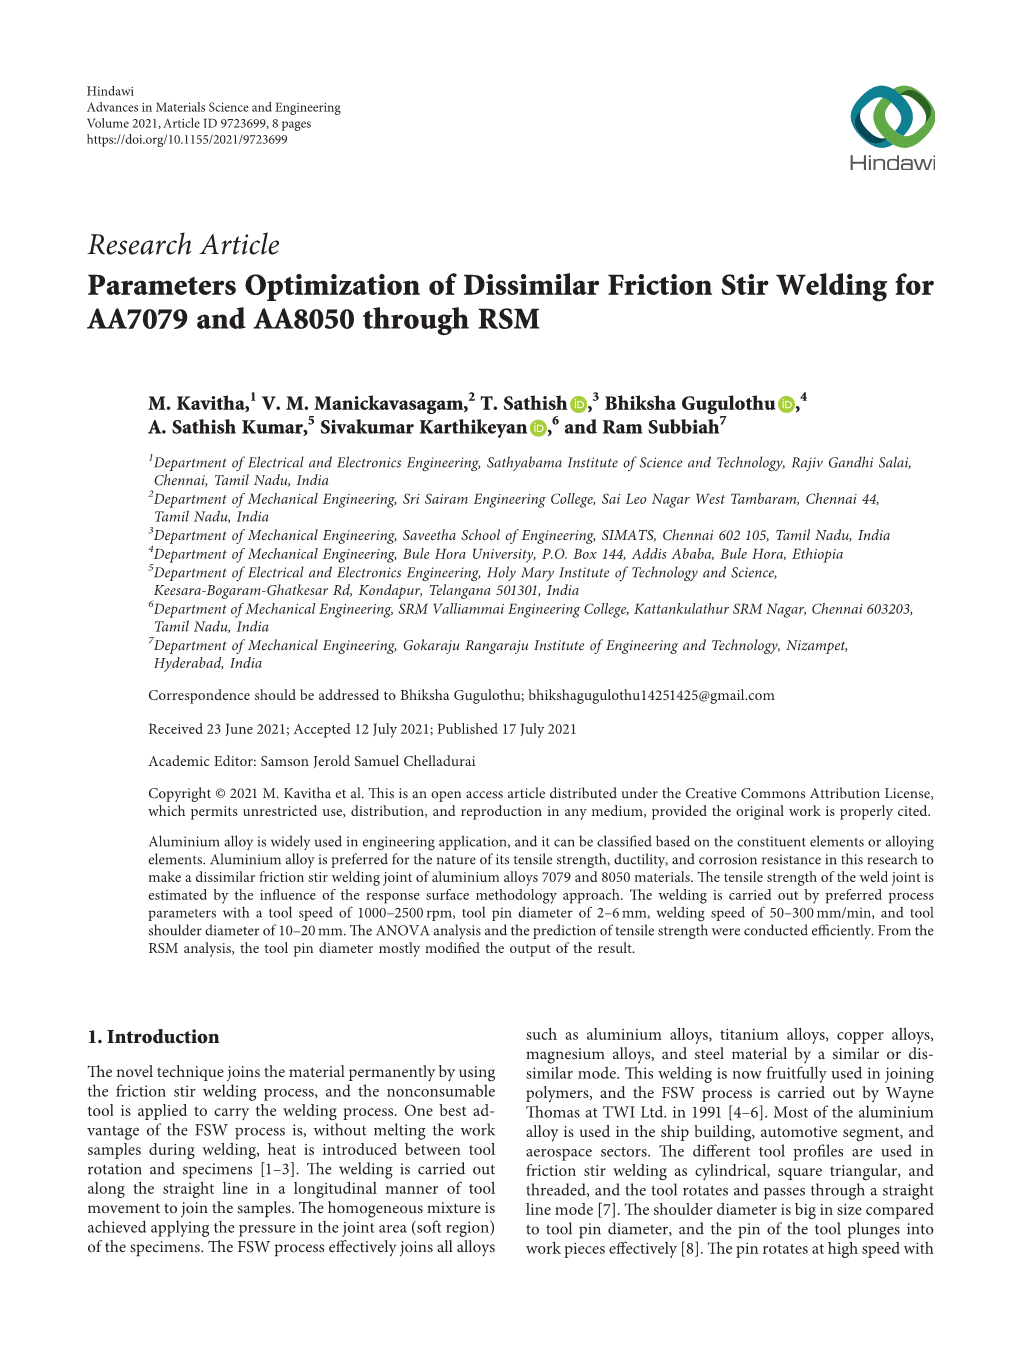 Parameters Optimization of Dissimilar Friction Stir Welding for AA7079 and AA8050 Through RSM